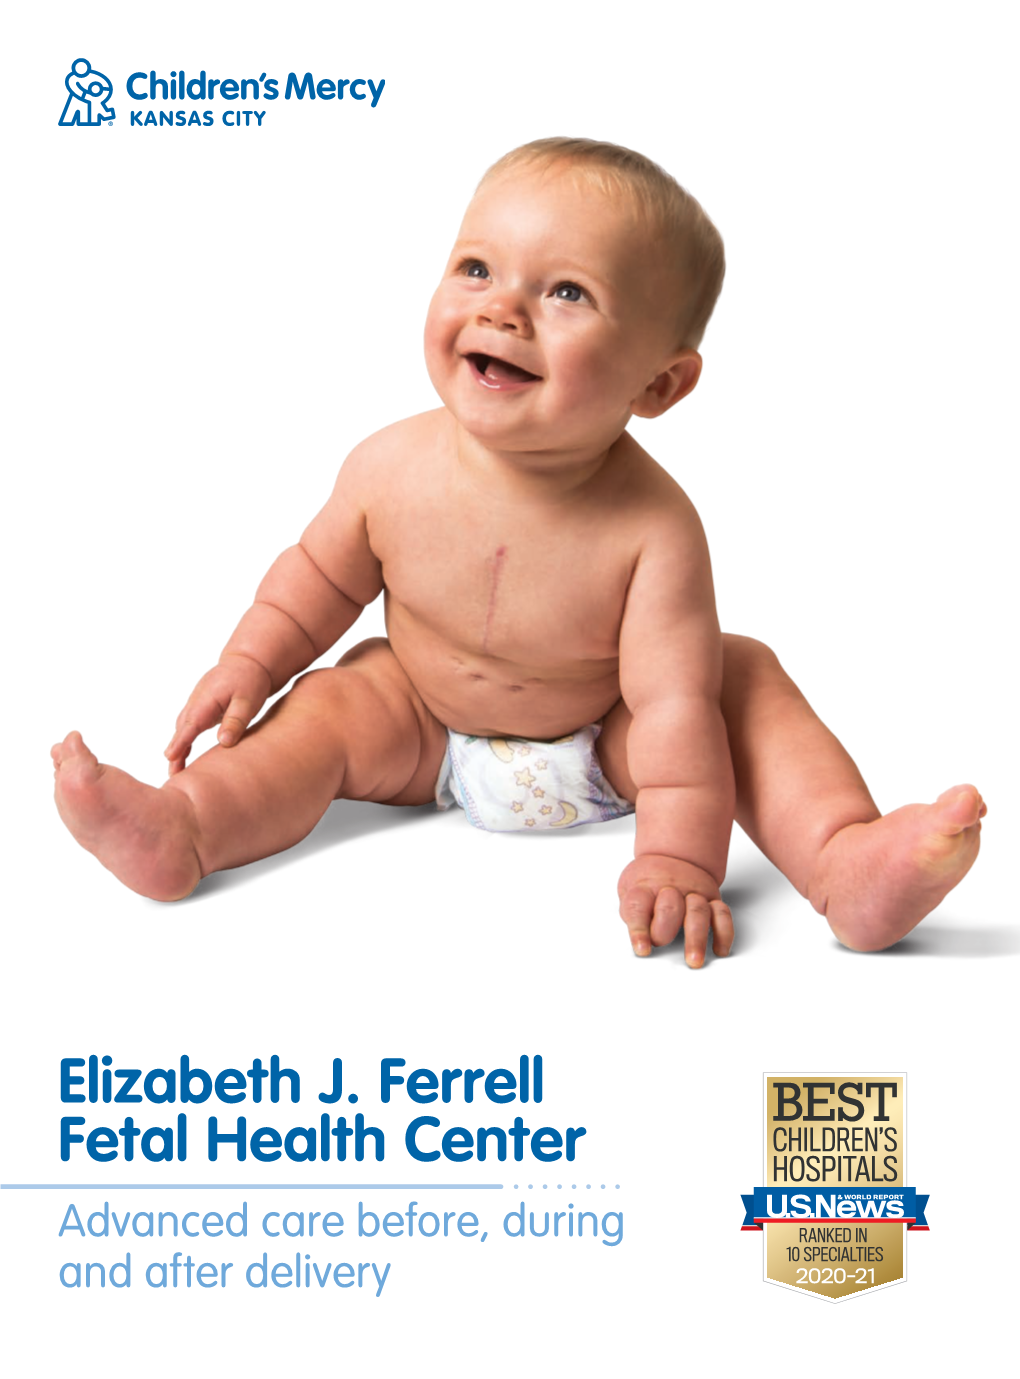 Elizabeth J. Ferrell Fetal Health Center Advanced Care Before, During and After Delivery Welcome to the Elizabeth J